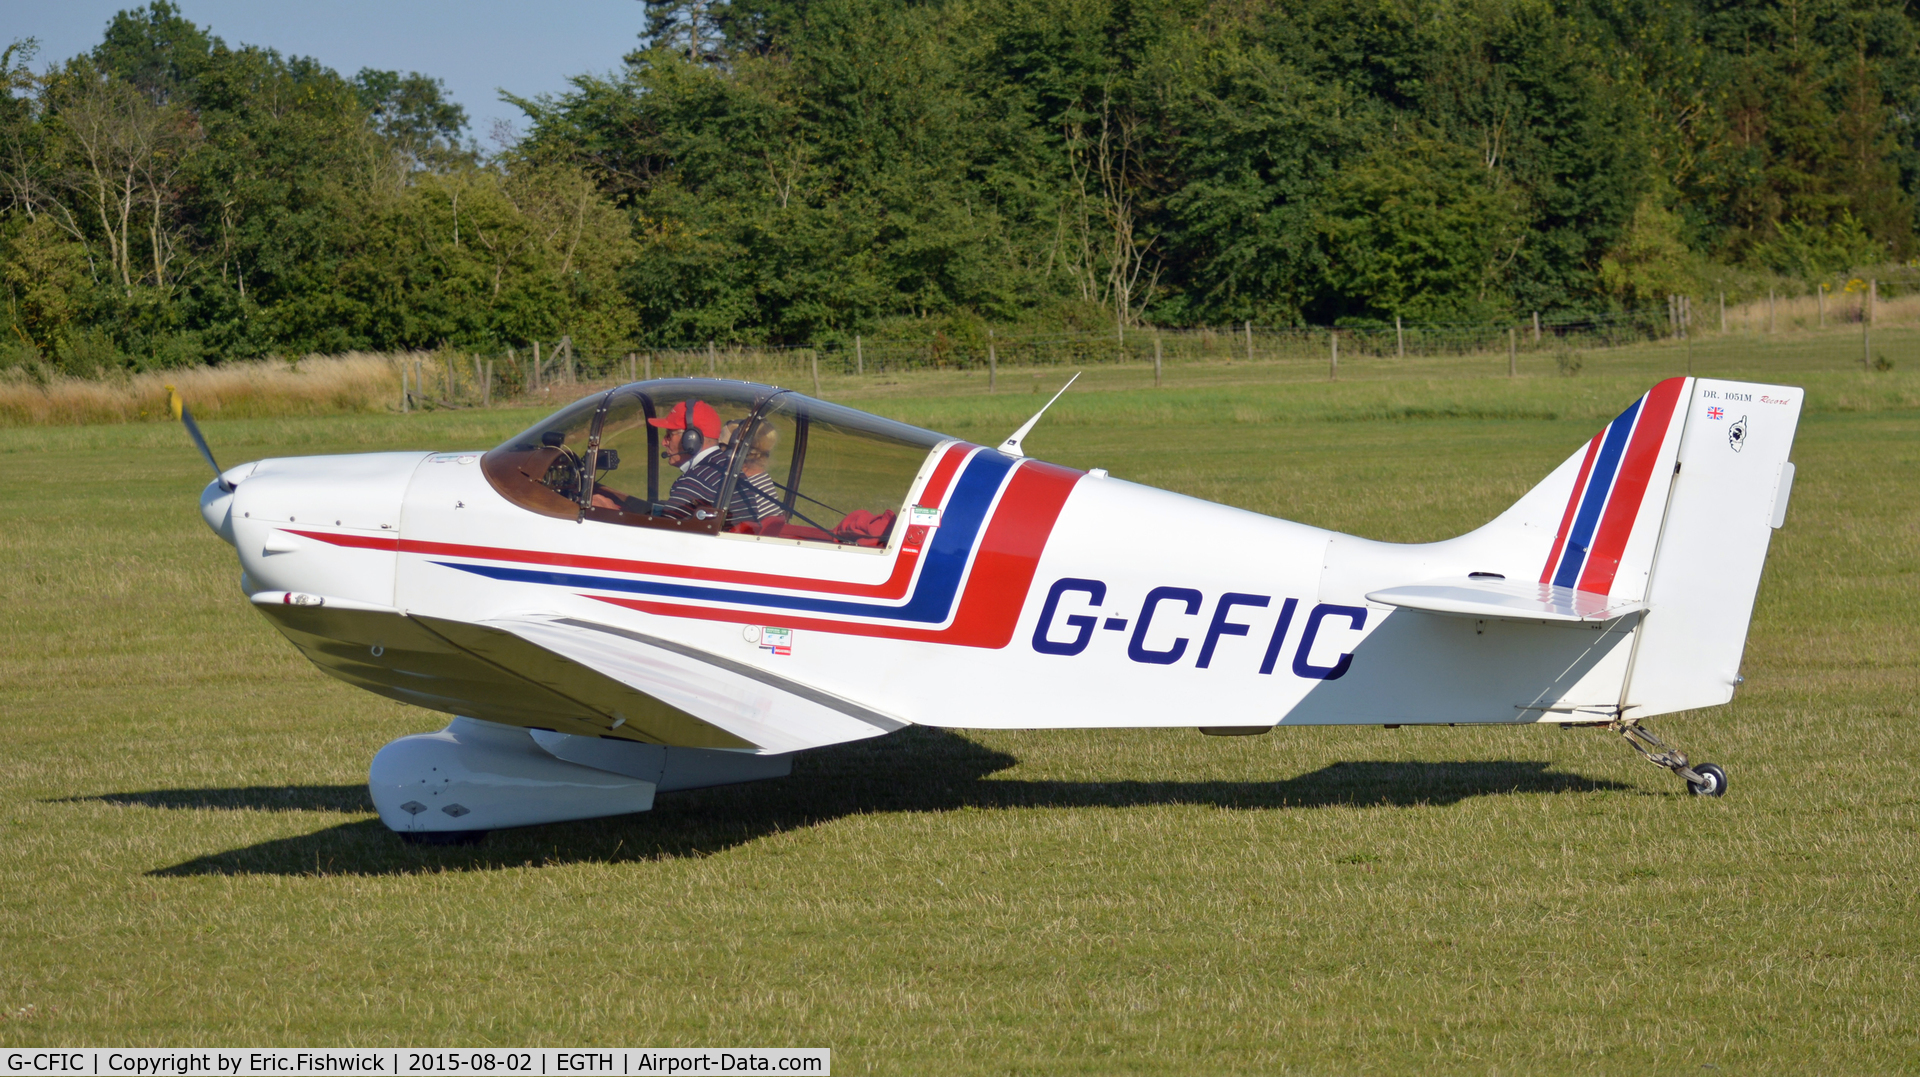 G-CFIC, 1963 CEA Jodel DR-1050/M-1 Record Sicile C/N 432, 1. G-CFIC preparing to depart The Shuttleworth Wings and Wheels Airshow, Aug. 2015.